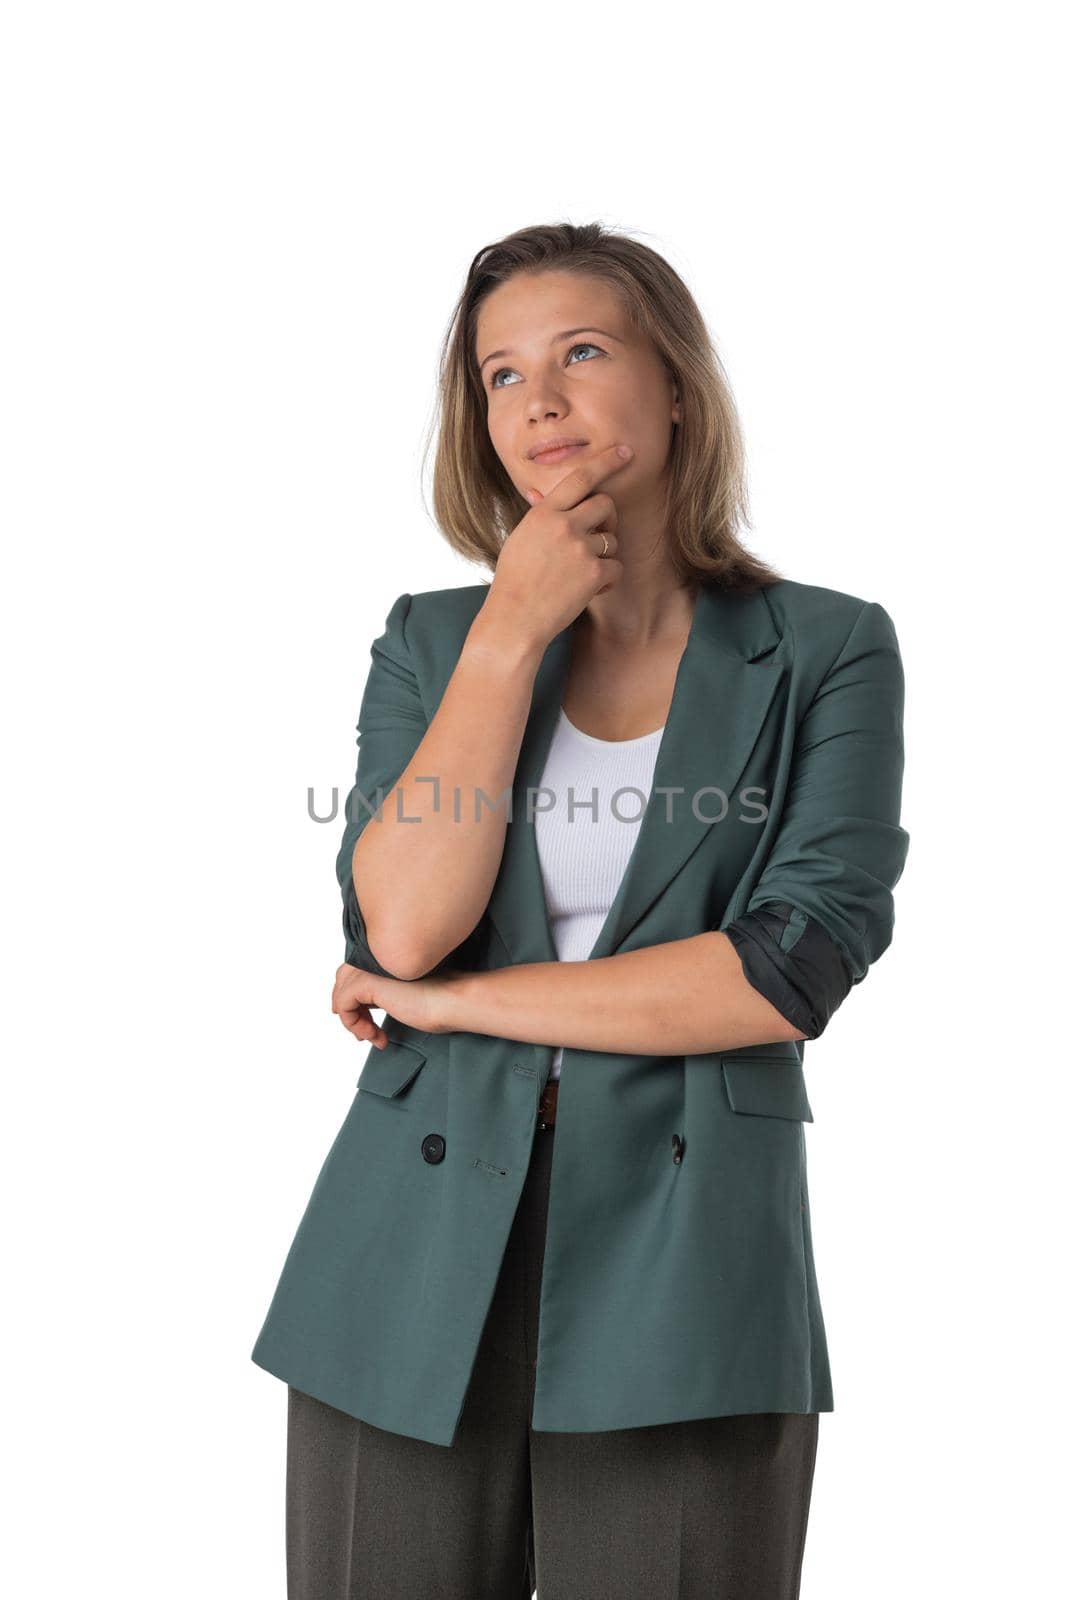 Portrait of business woman thinking by ALotOfPeople